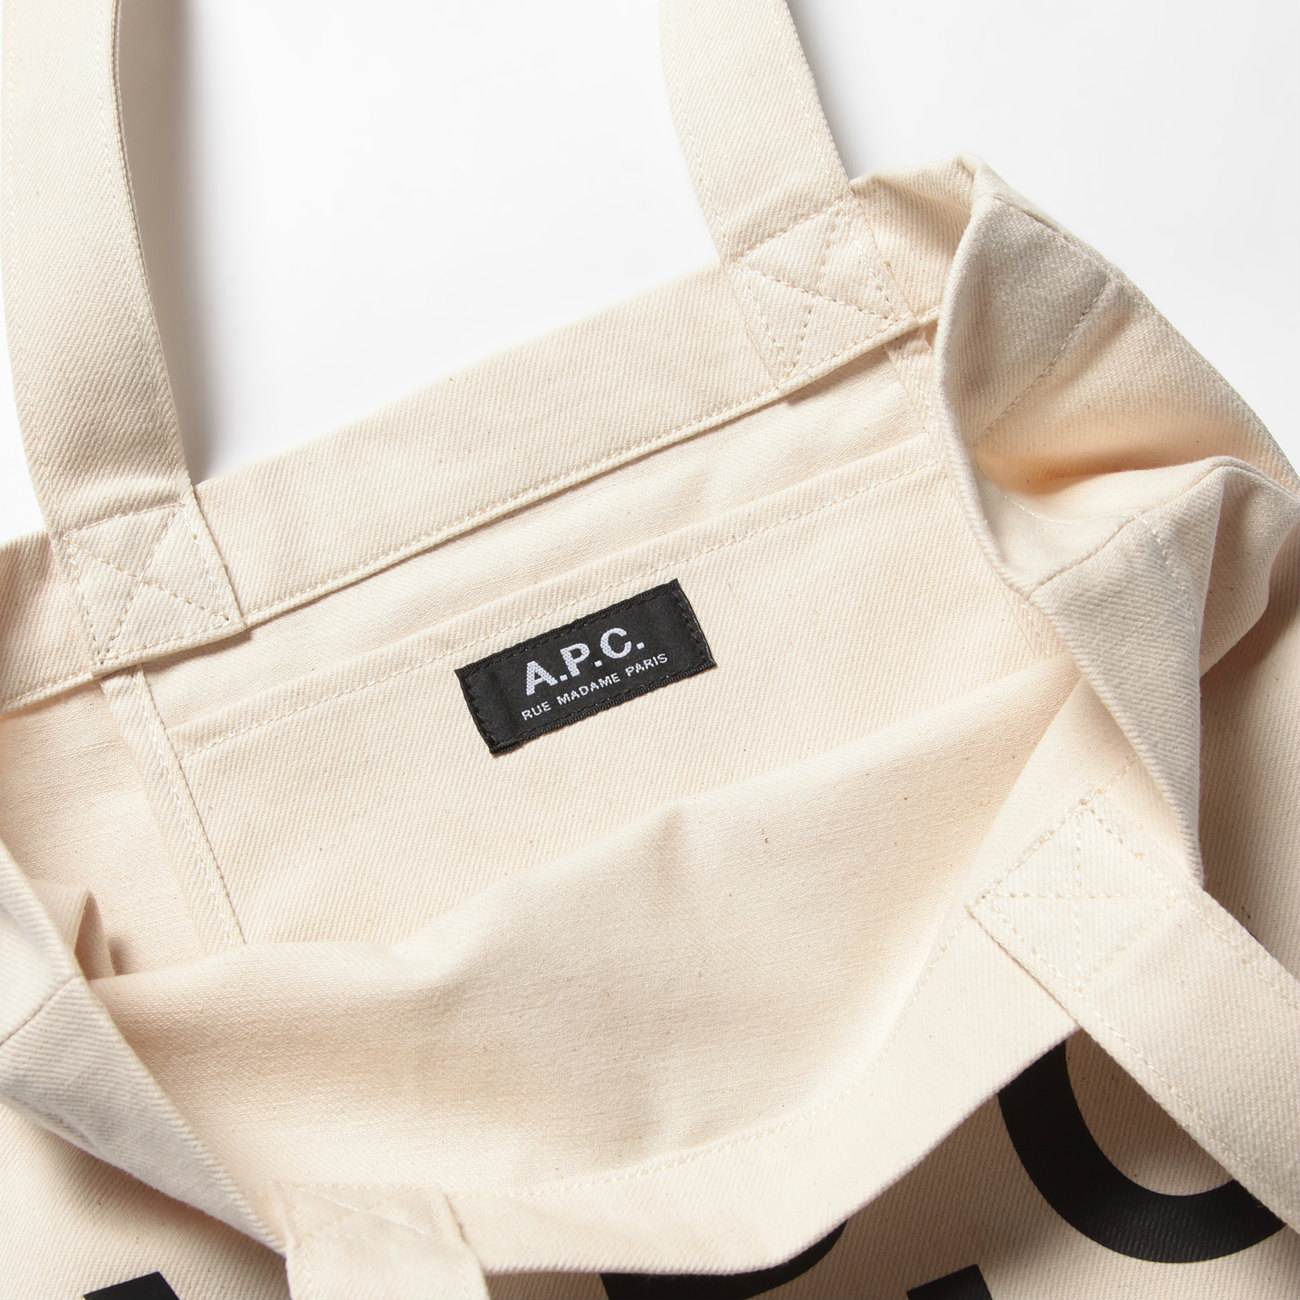 A.P.C. / アーペーセー | Laure トートバッグ - 生成 | 通販 - 正規